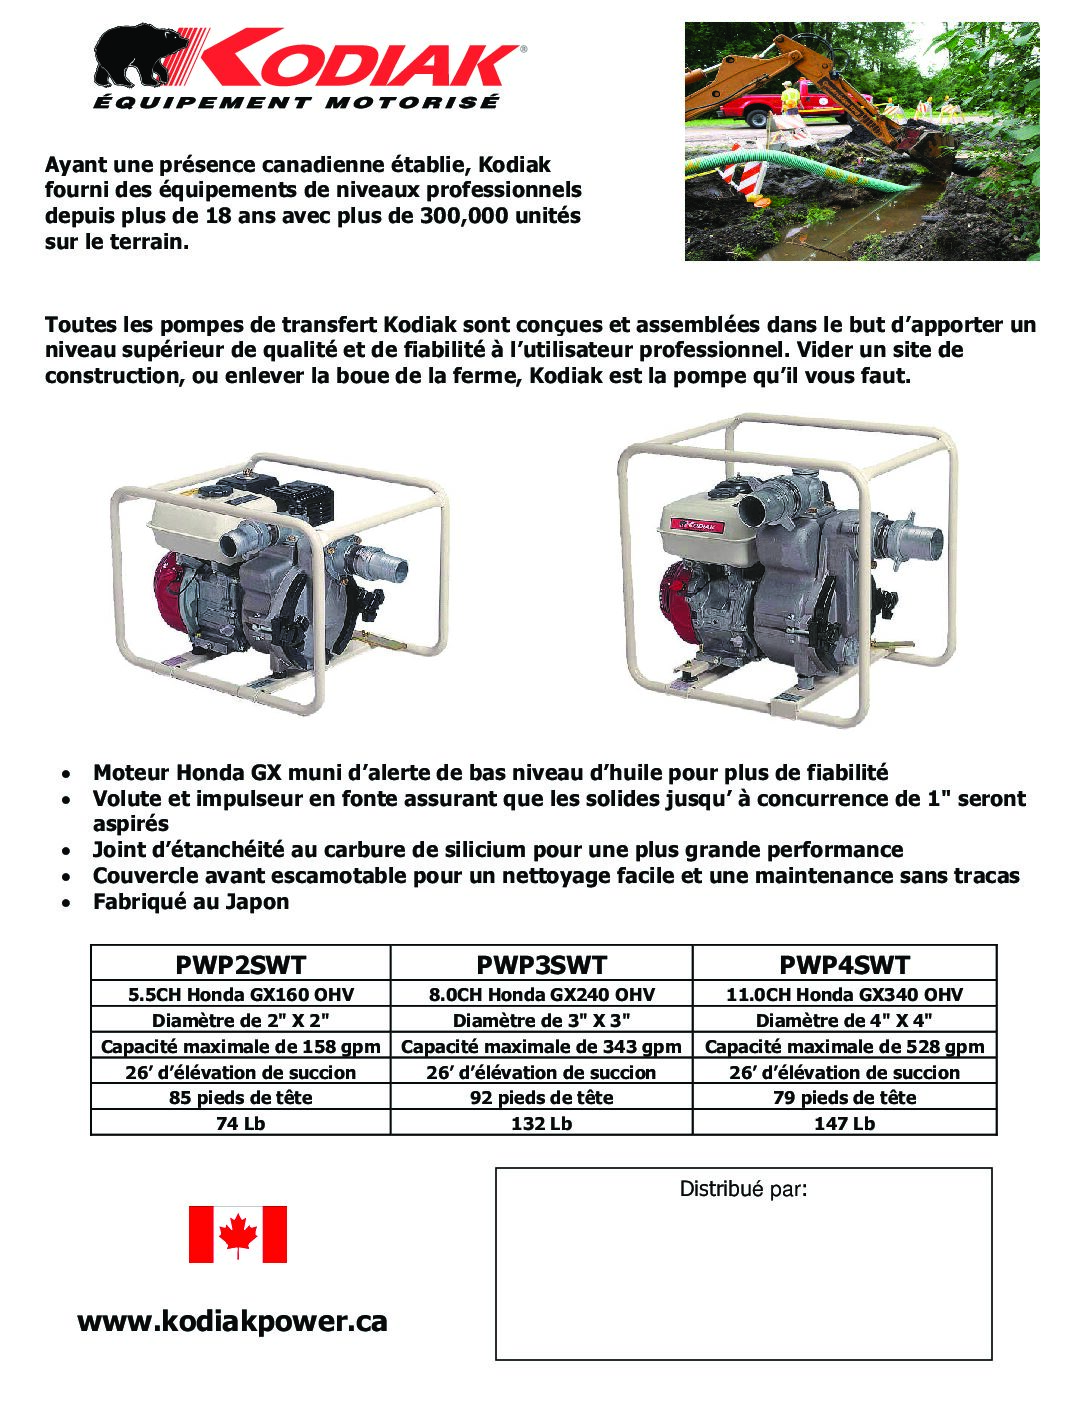 PWP3SWT French Brochure